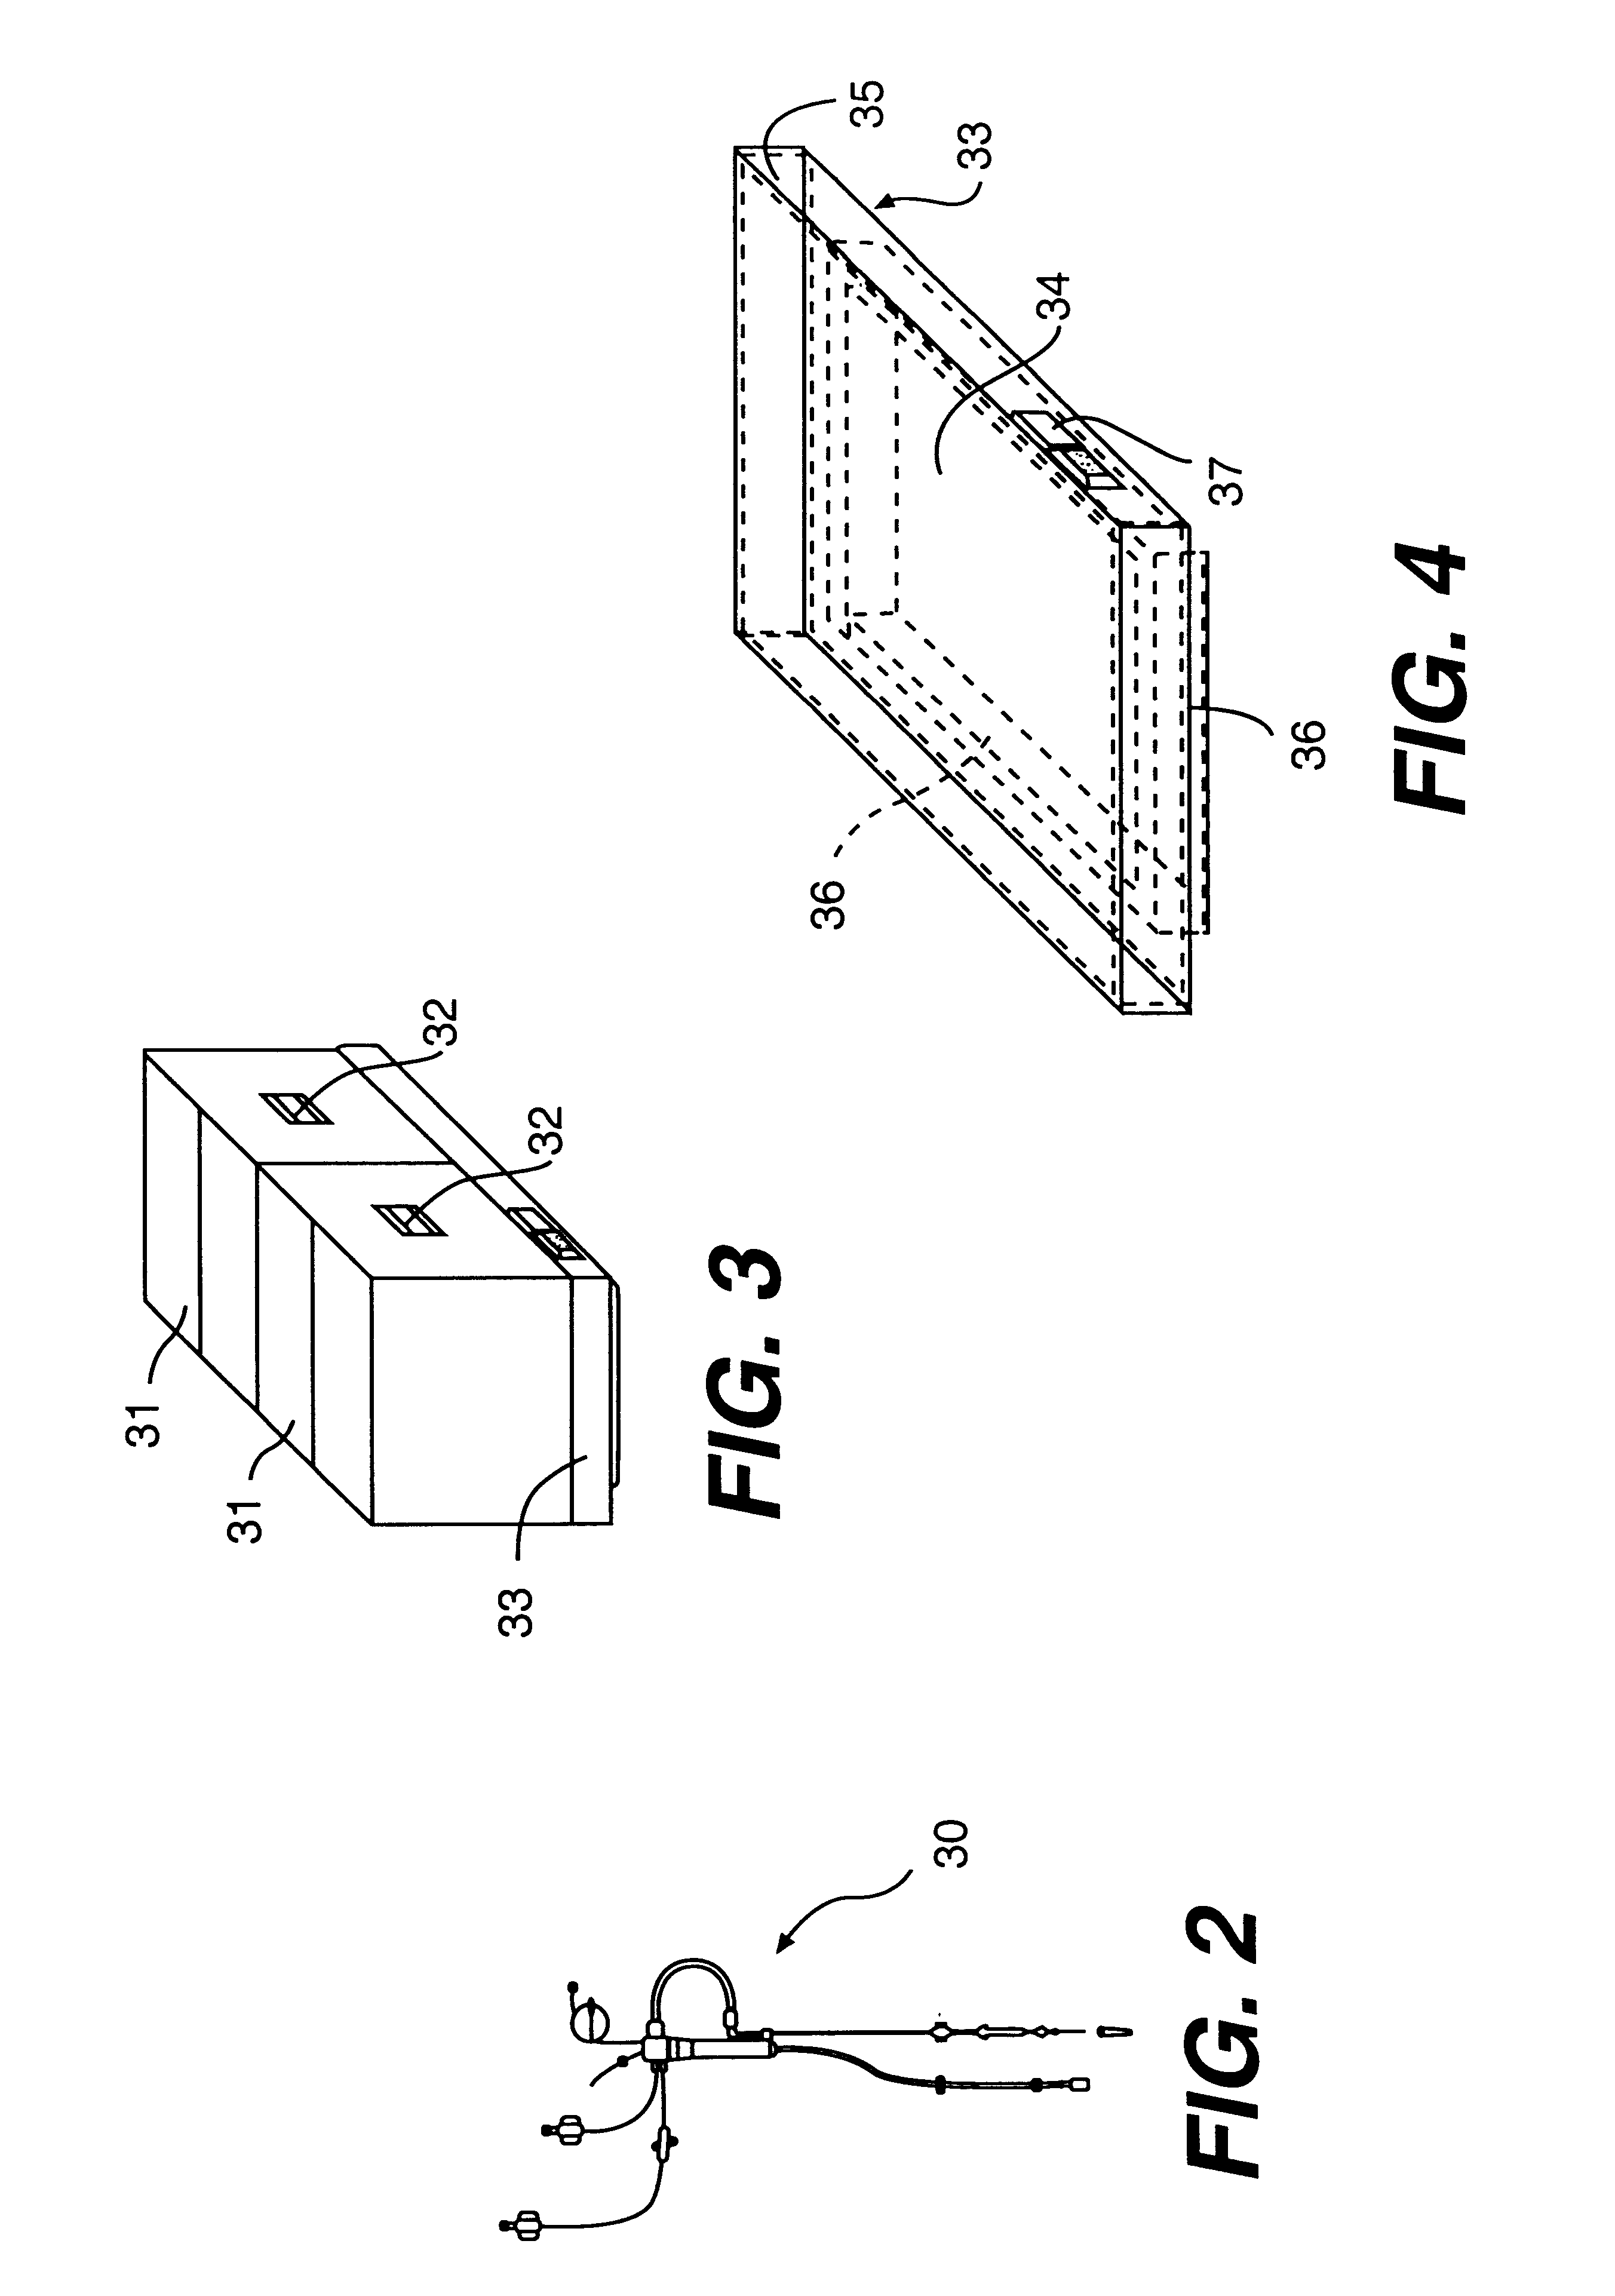 System for sterilizing medicinal products by beta-radiation processing